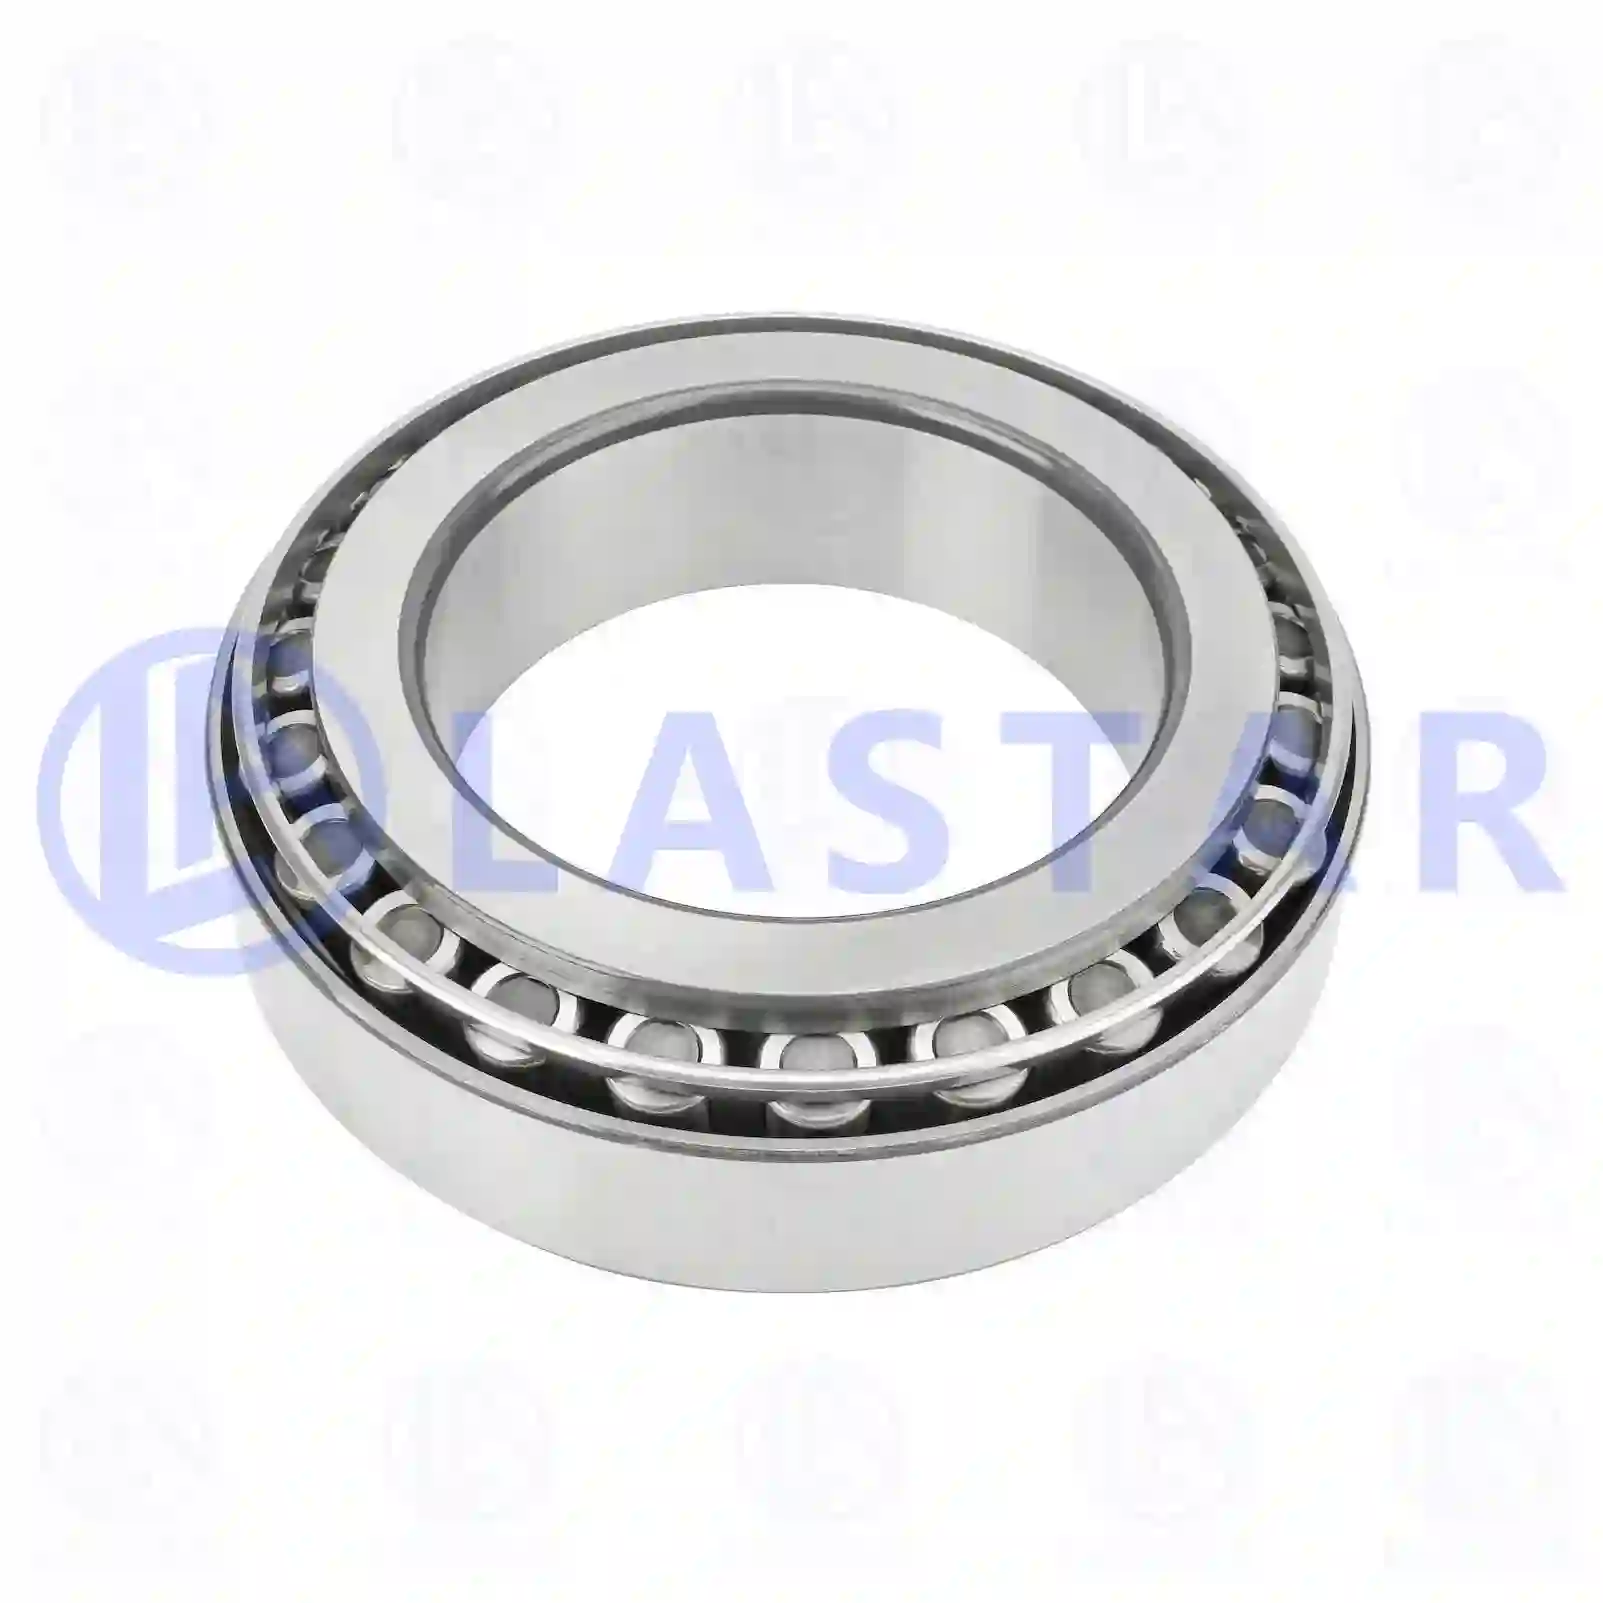 Tapered roller bearing, 77724629, 9442156, 08194959, 0023336046, 0023336123, 0959901205, 3661013900, 324791025000, JHM72024999401, 2V2501319B ||  77724629 Lastar Spare Part | Truck Spare Parts, Auotomotive Spare Parts Tapered roller bearing, 77724629, 9442156, 08194959, 0023336046, 0023336123, 0959901205, 3661013900, 324791025000, JHM72024999401, 2V2501319B ||  77724629 Lastar Spare Part | Truck Spare Parts, Auotomotive Spare Parts